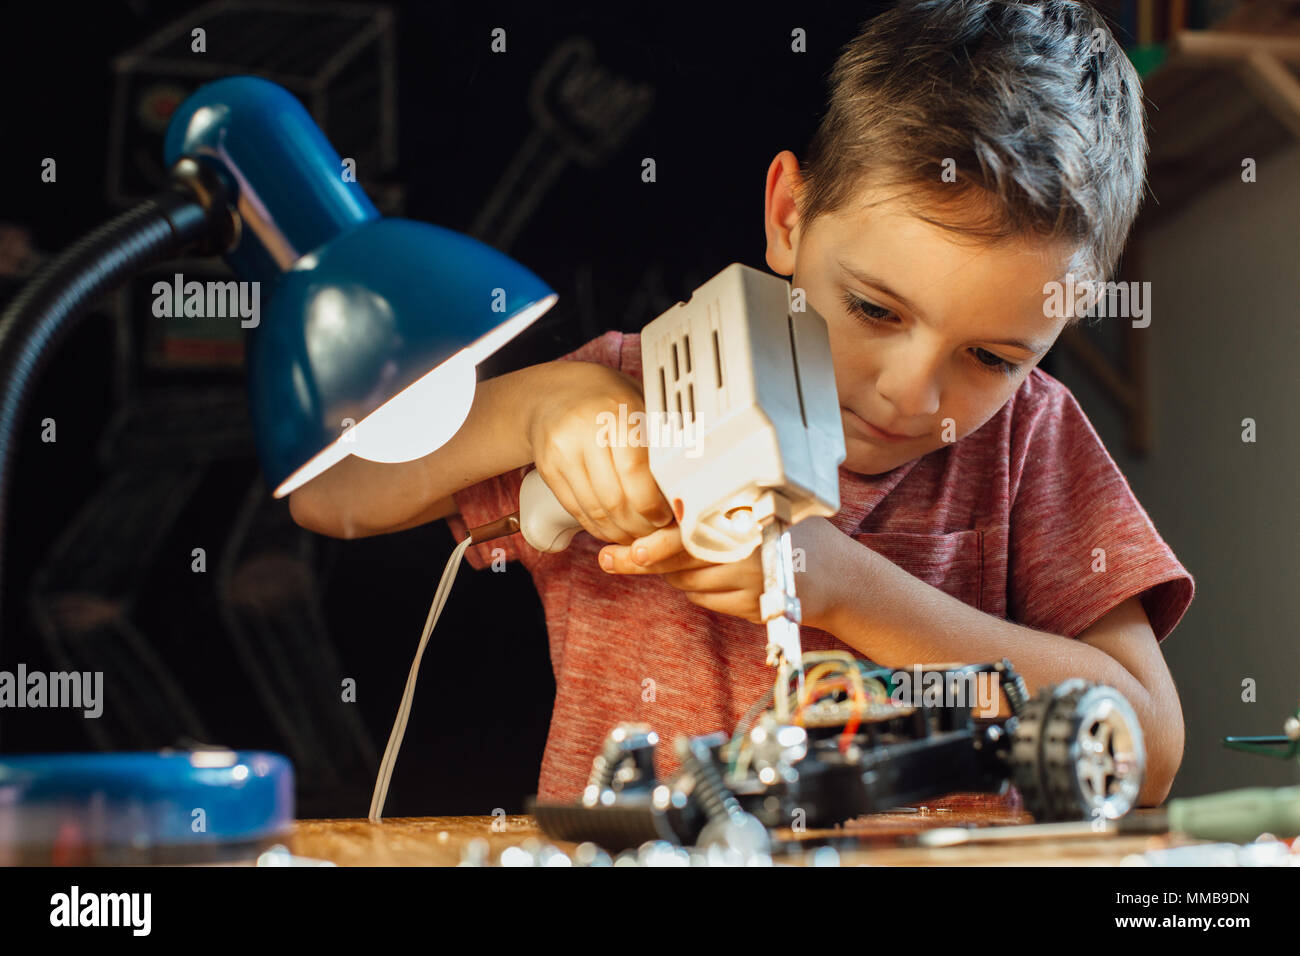 Portrait of a smart boy learning how to solder at home. Child using a soldering gun and working on his robotic car. Stock Photo